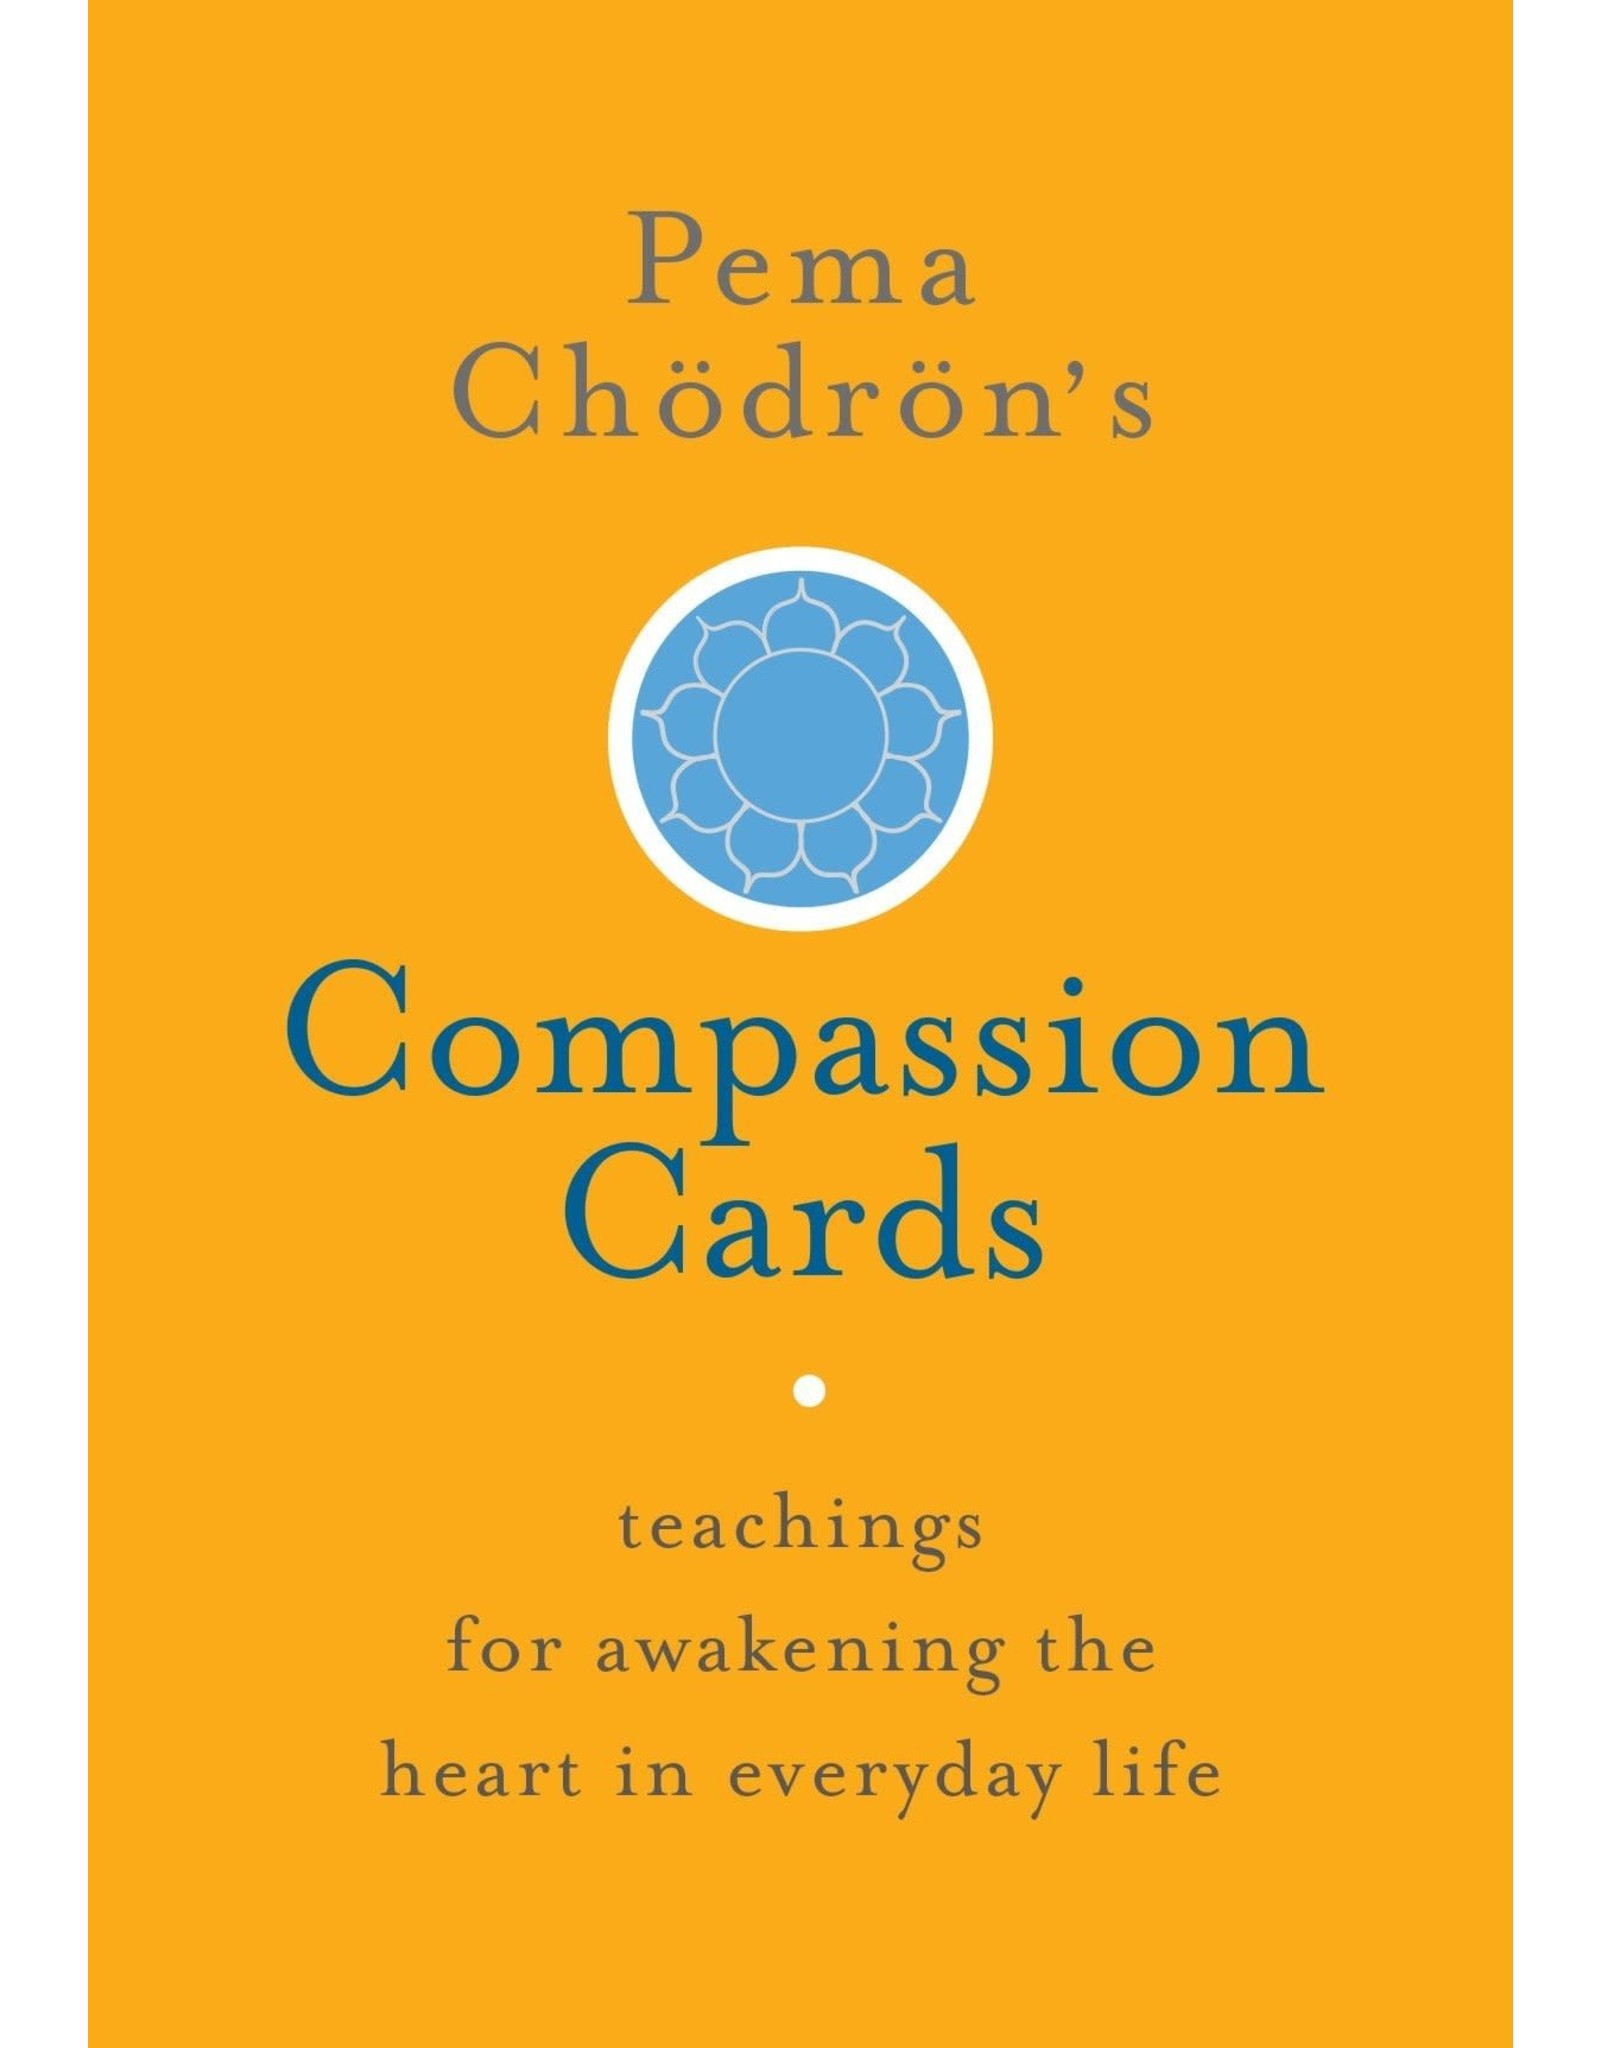 Trade roots Pema Chodron's Compassion Cards